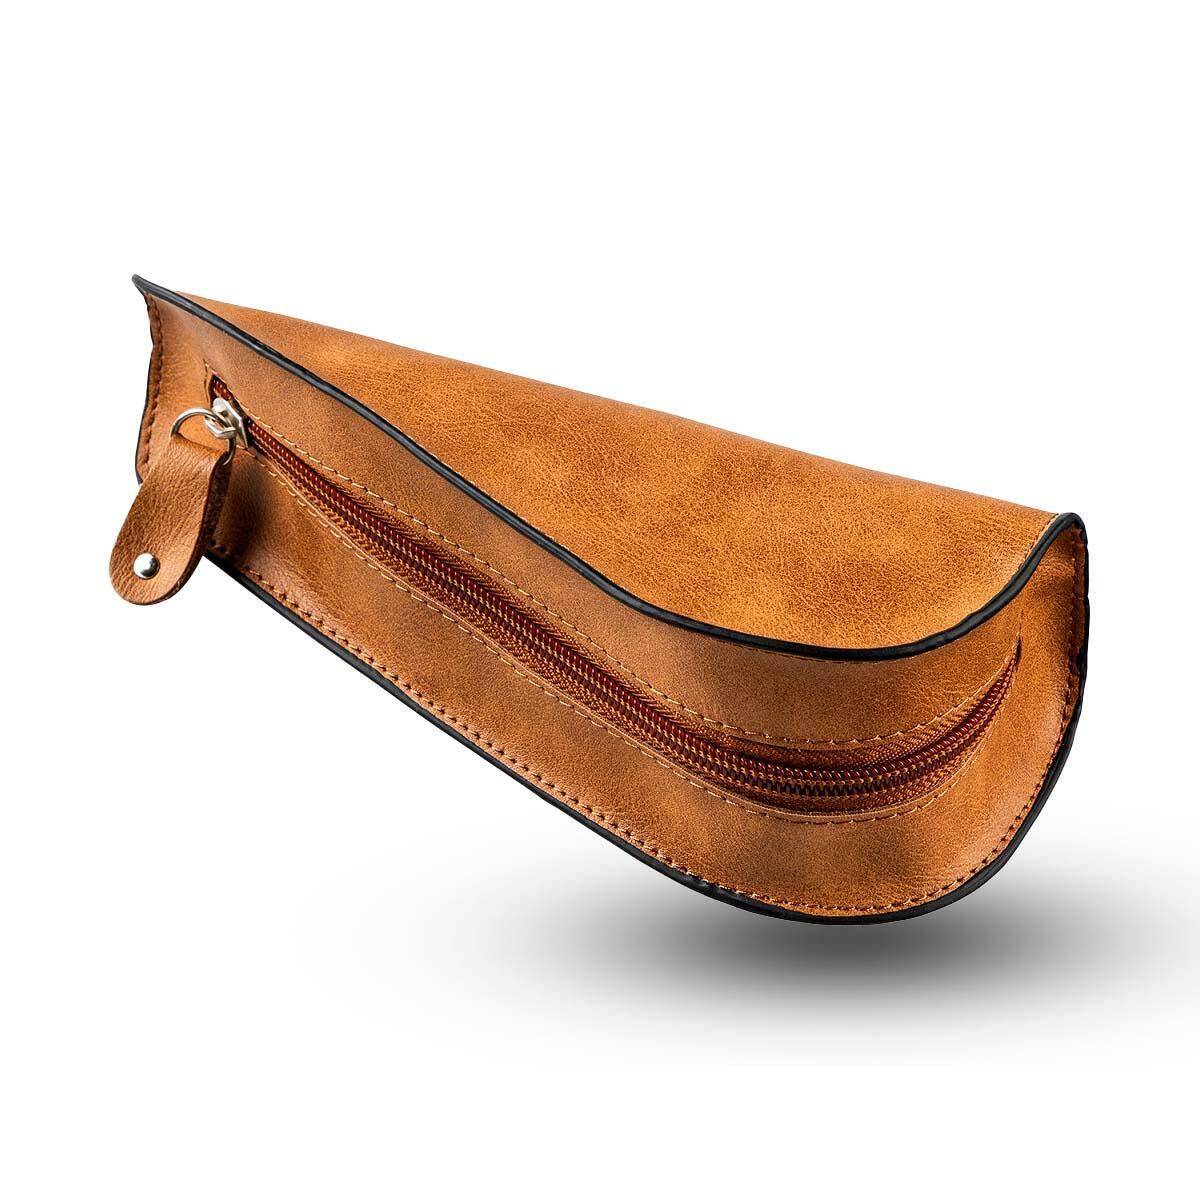 Pipe case, light brown